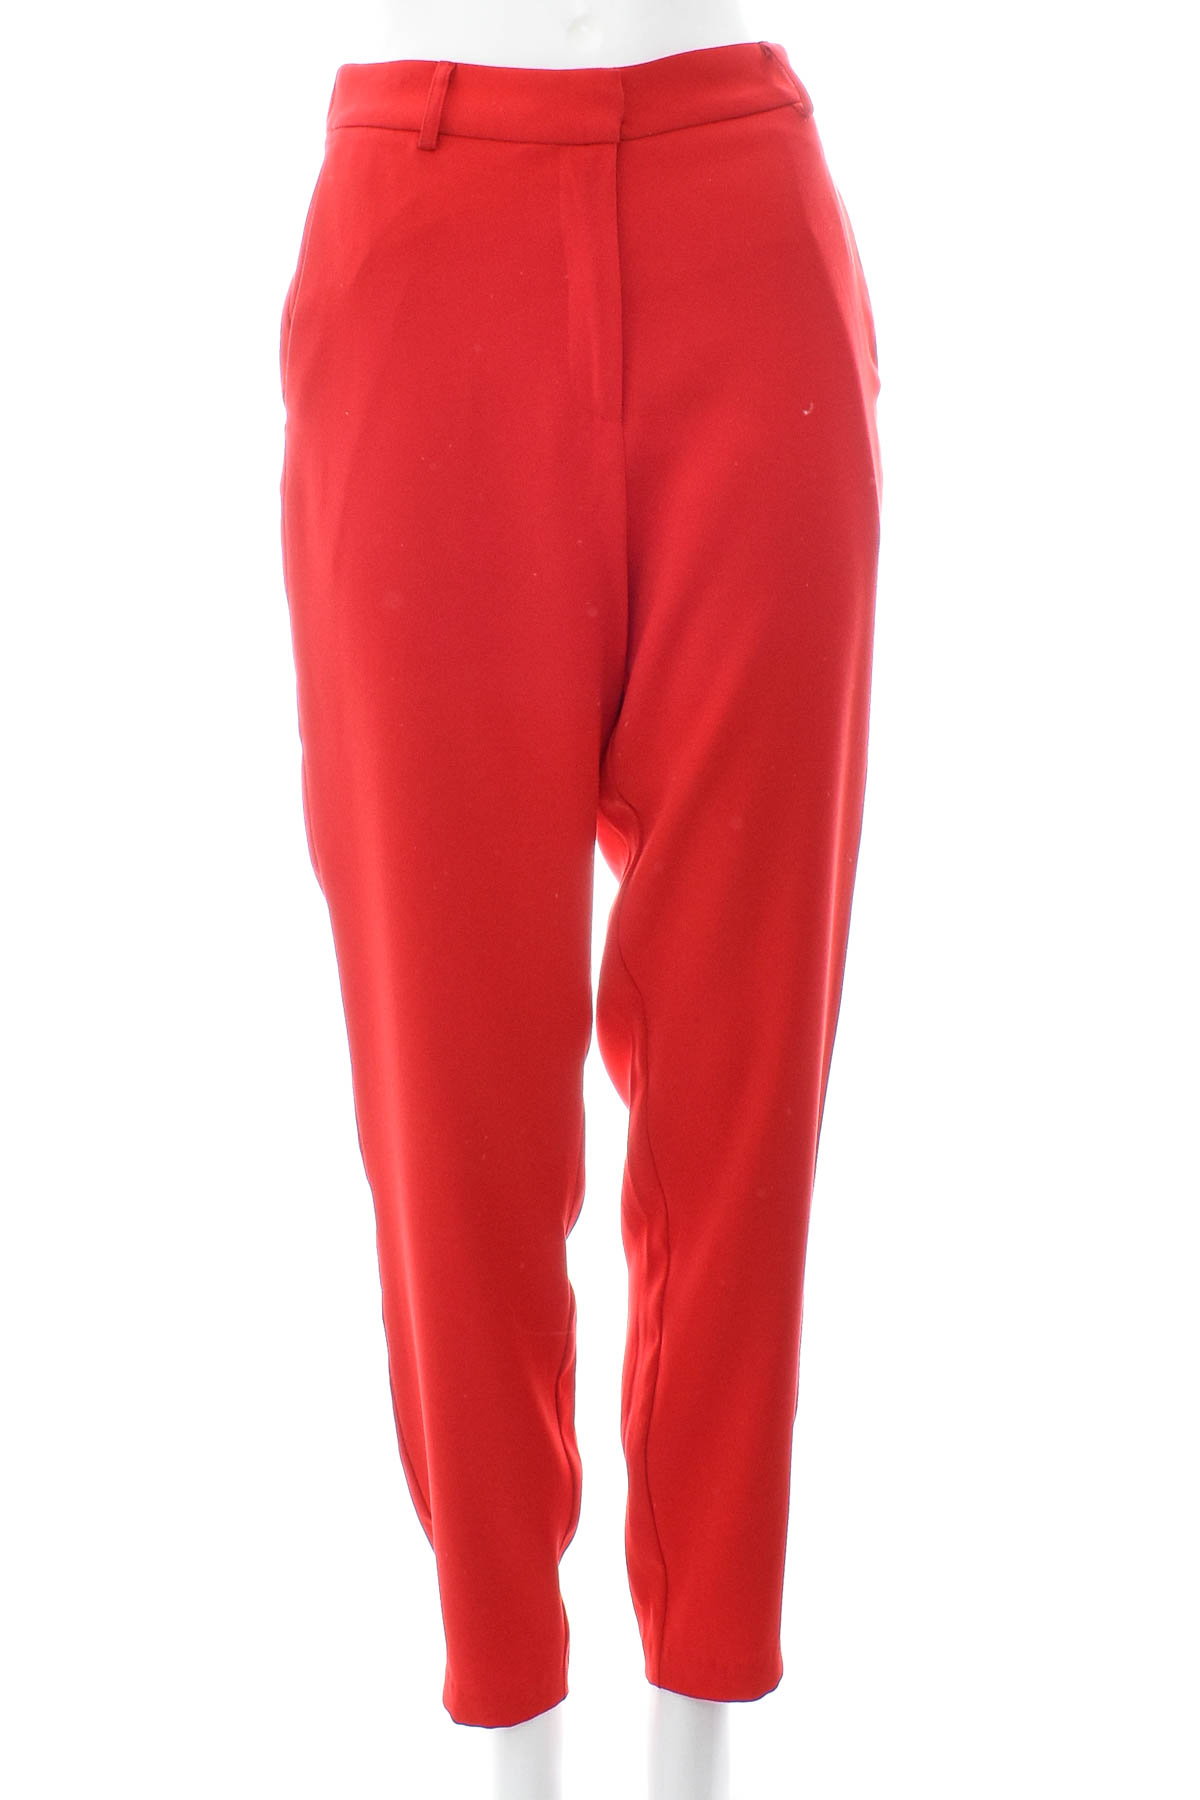 Women's trousers - SELECTED FEMME - 0